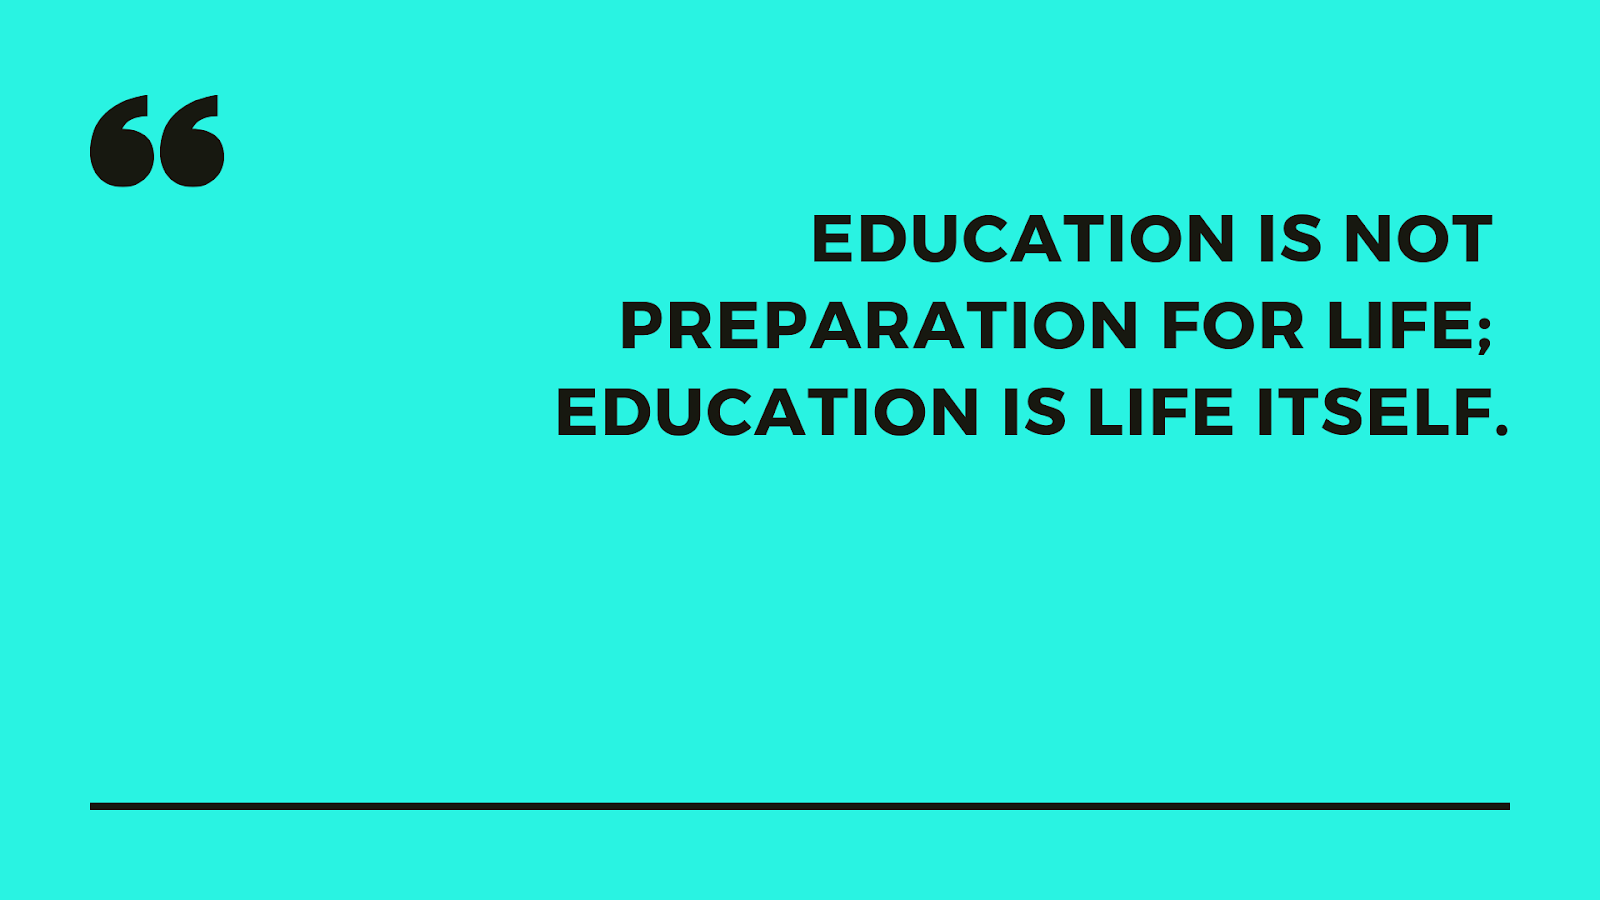 Why is Education Important in Life?